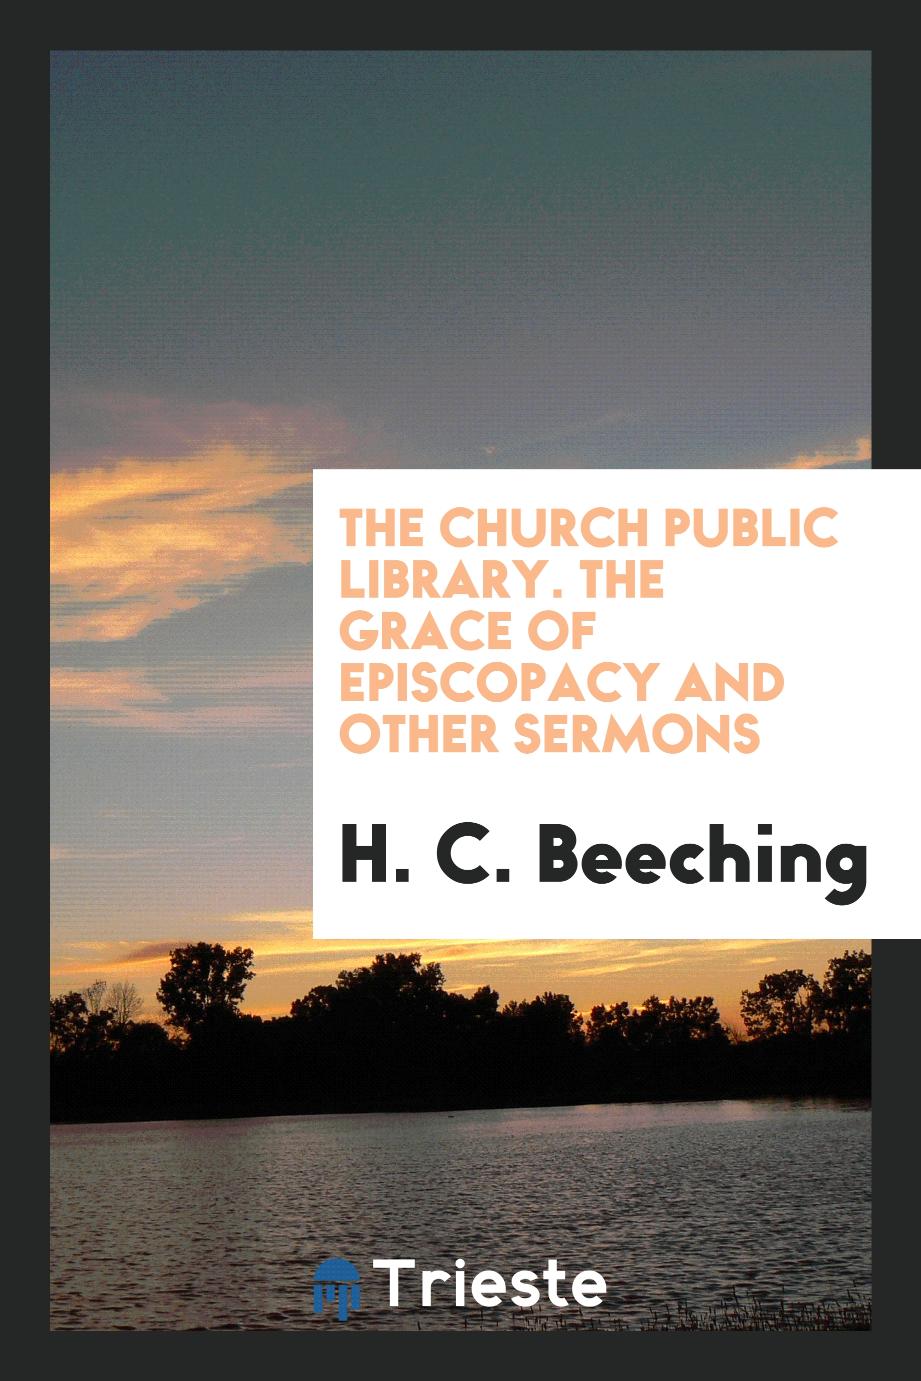 The church public library. The grace of episcopacy and other sermons